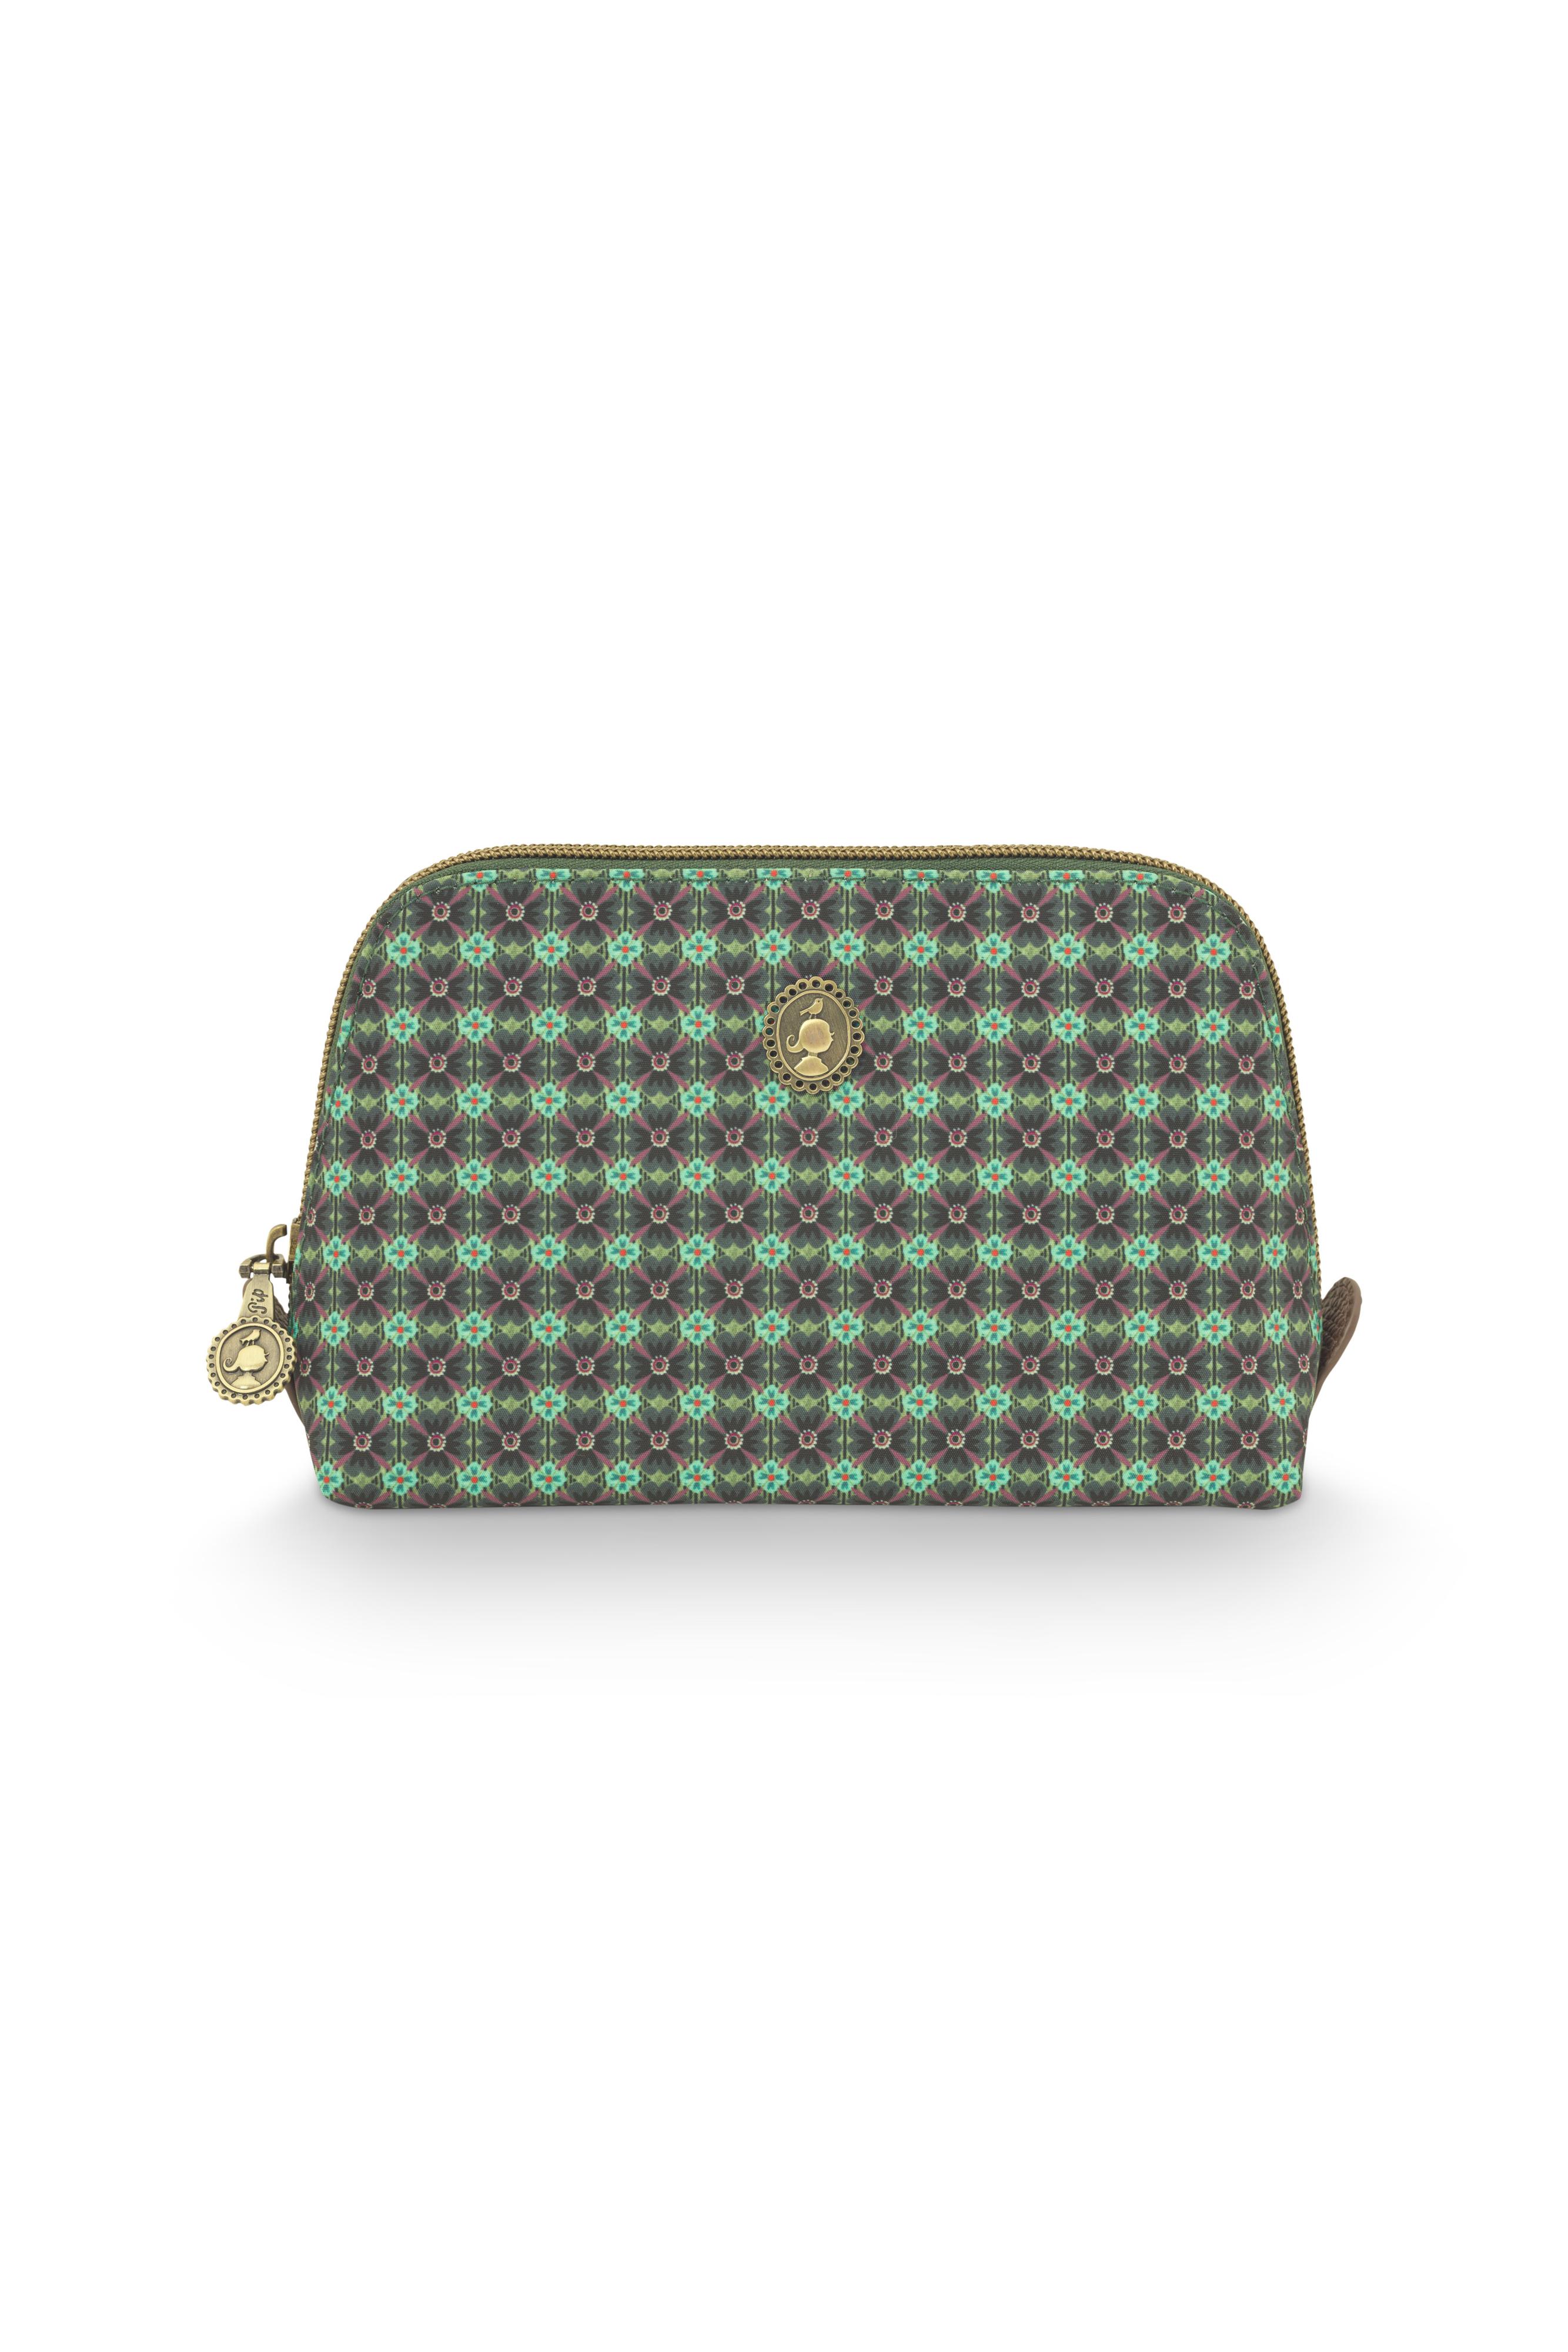 Coby Cos Bag Tri Small Clover Green 19/15x12x6cm Gift